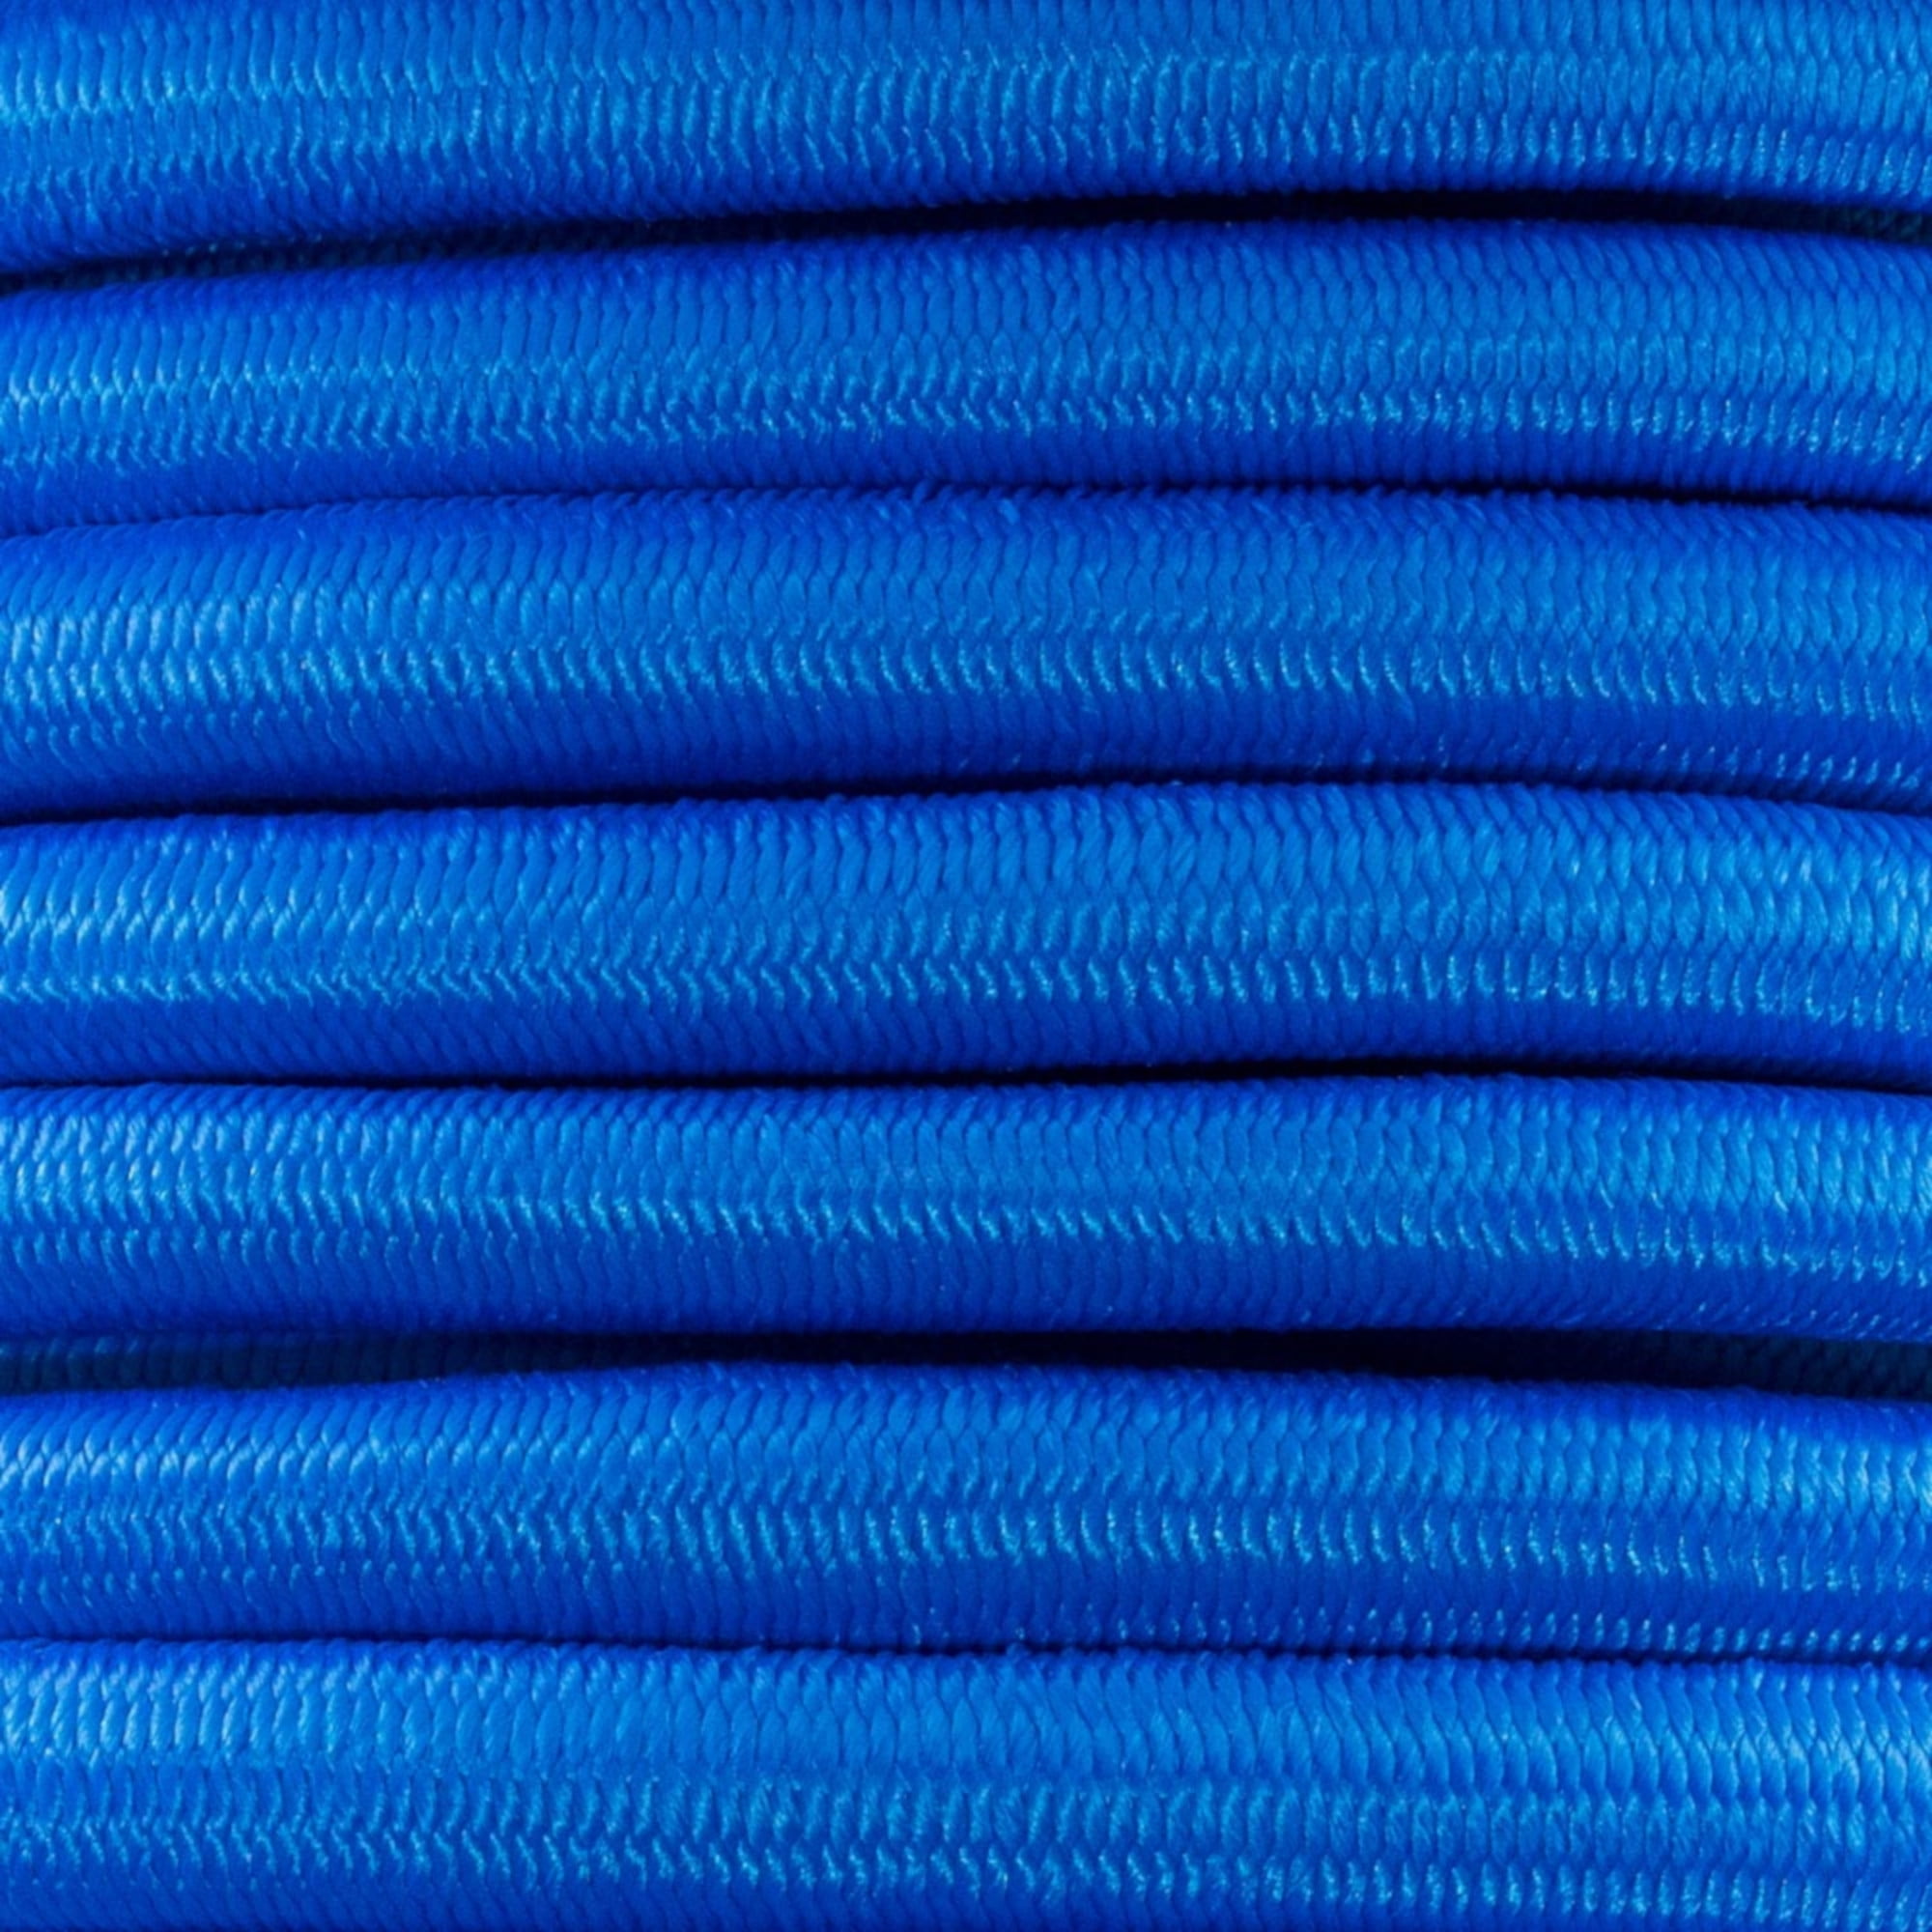 Paracord Planet - 1/8 inch Shock Cord x 50 Feet - Electric Blue - Comes with Two Carabiners, Size: 50 ft. Hank with Two Carabiners